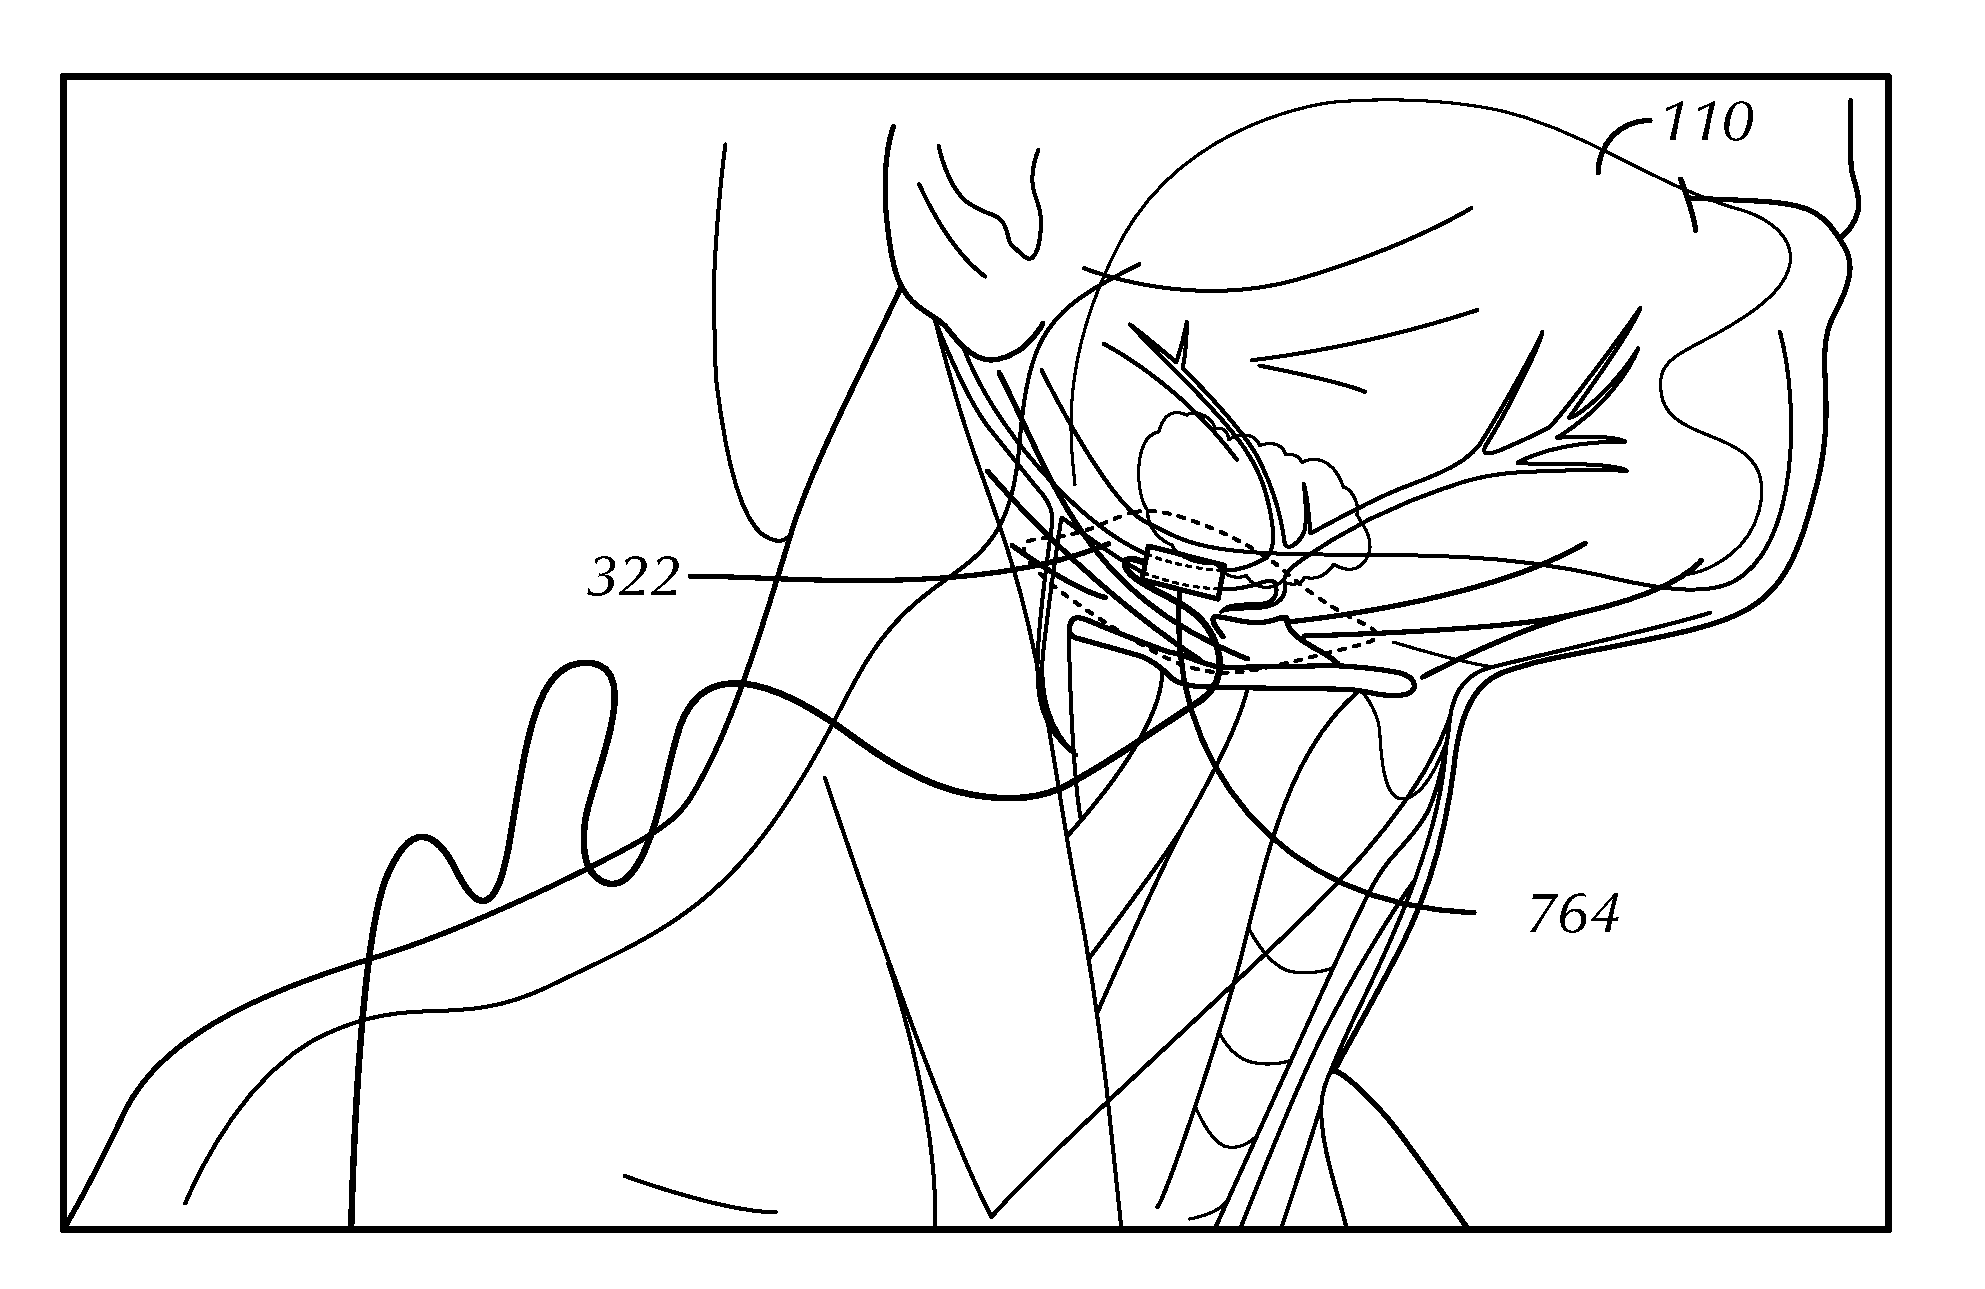 System for stimulating a hypoglossal nerve for controlling the position of a patient's tongue